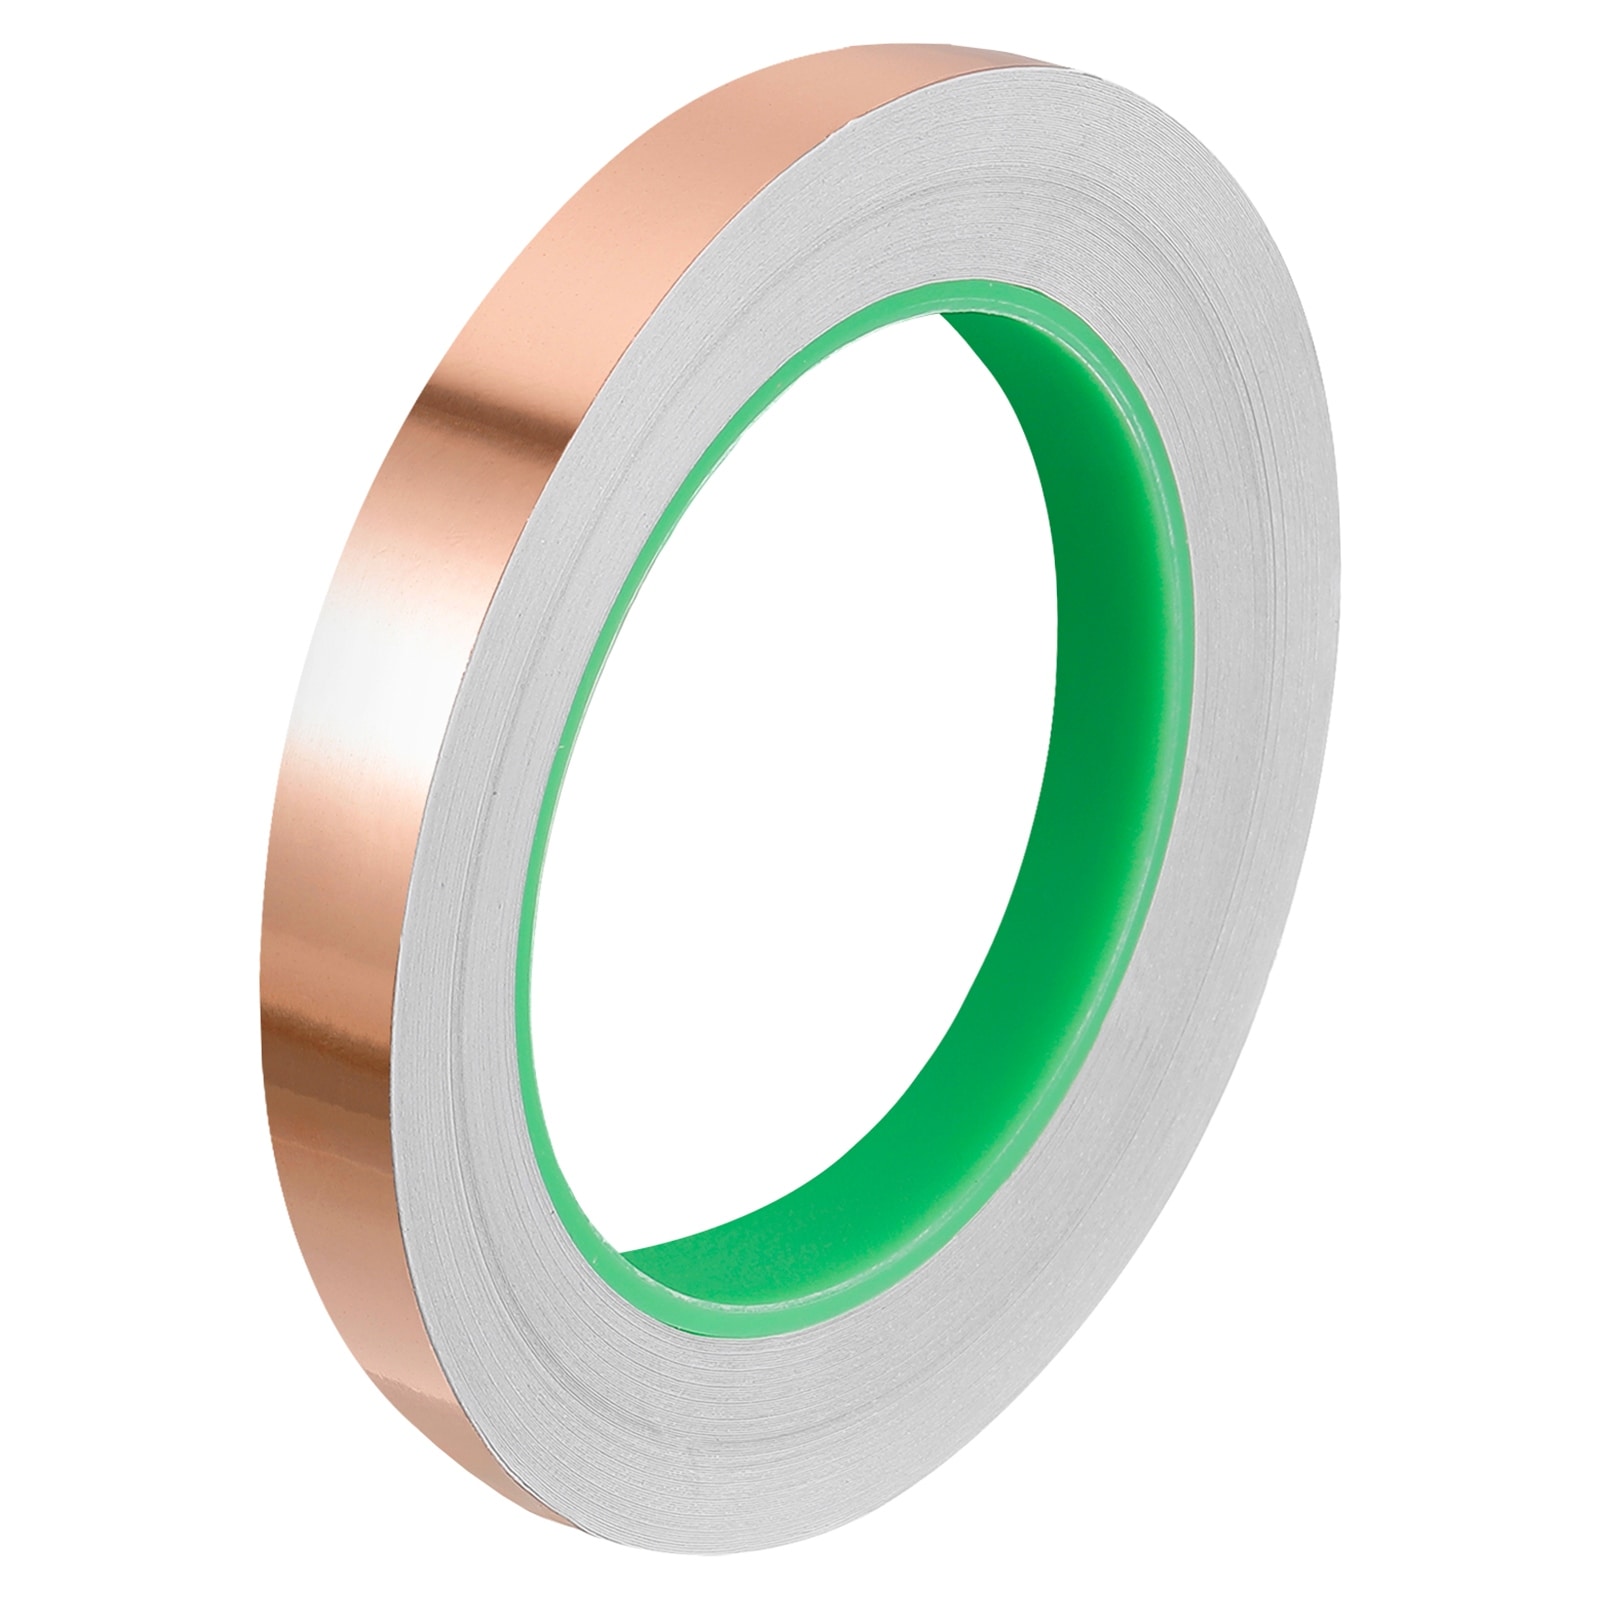 Copper Foil Tape 0.98 Inch x 21 Yards 0.08 Thick Double Sided for